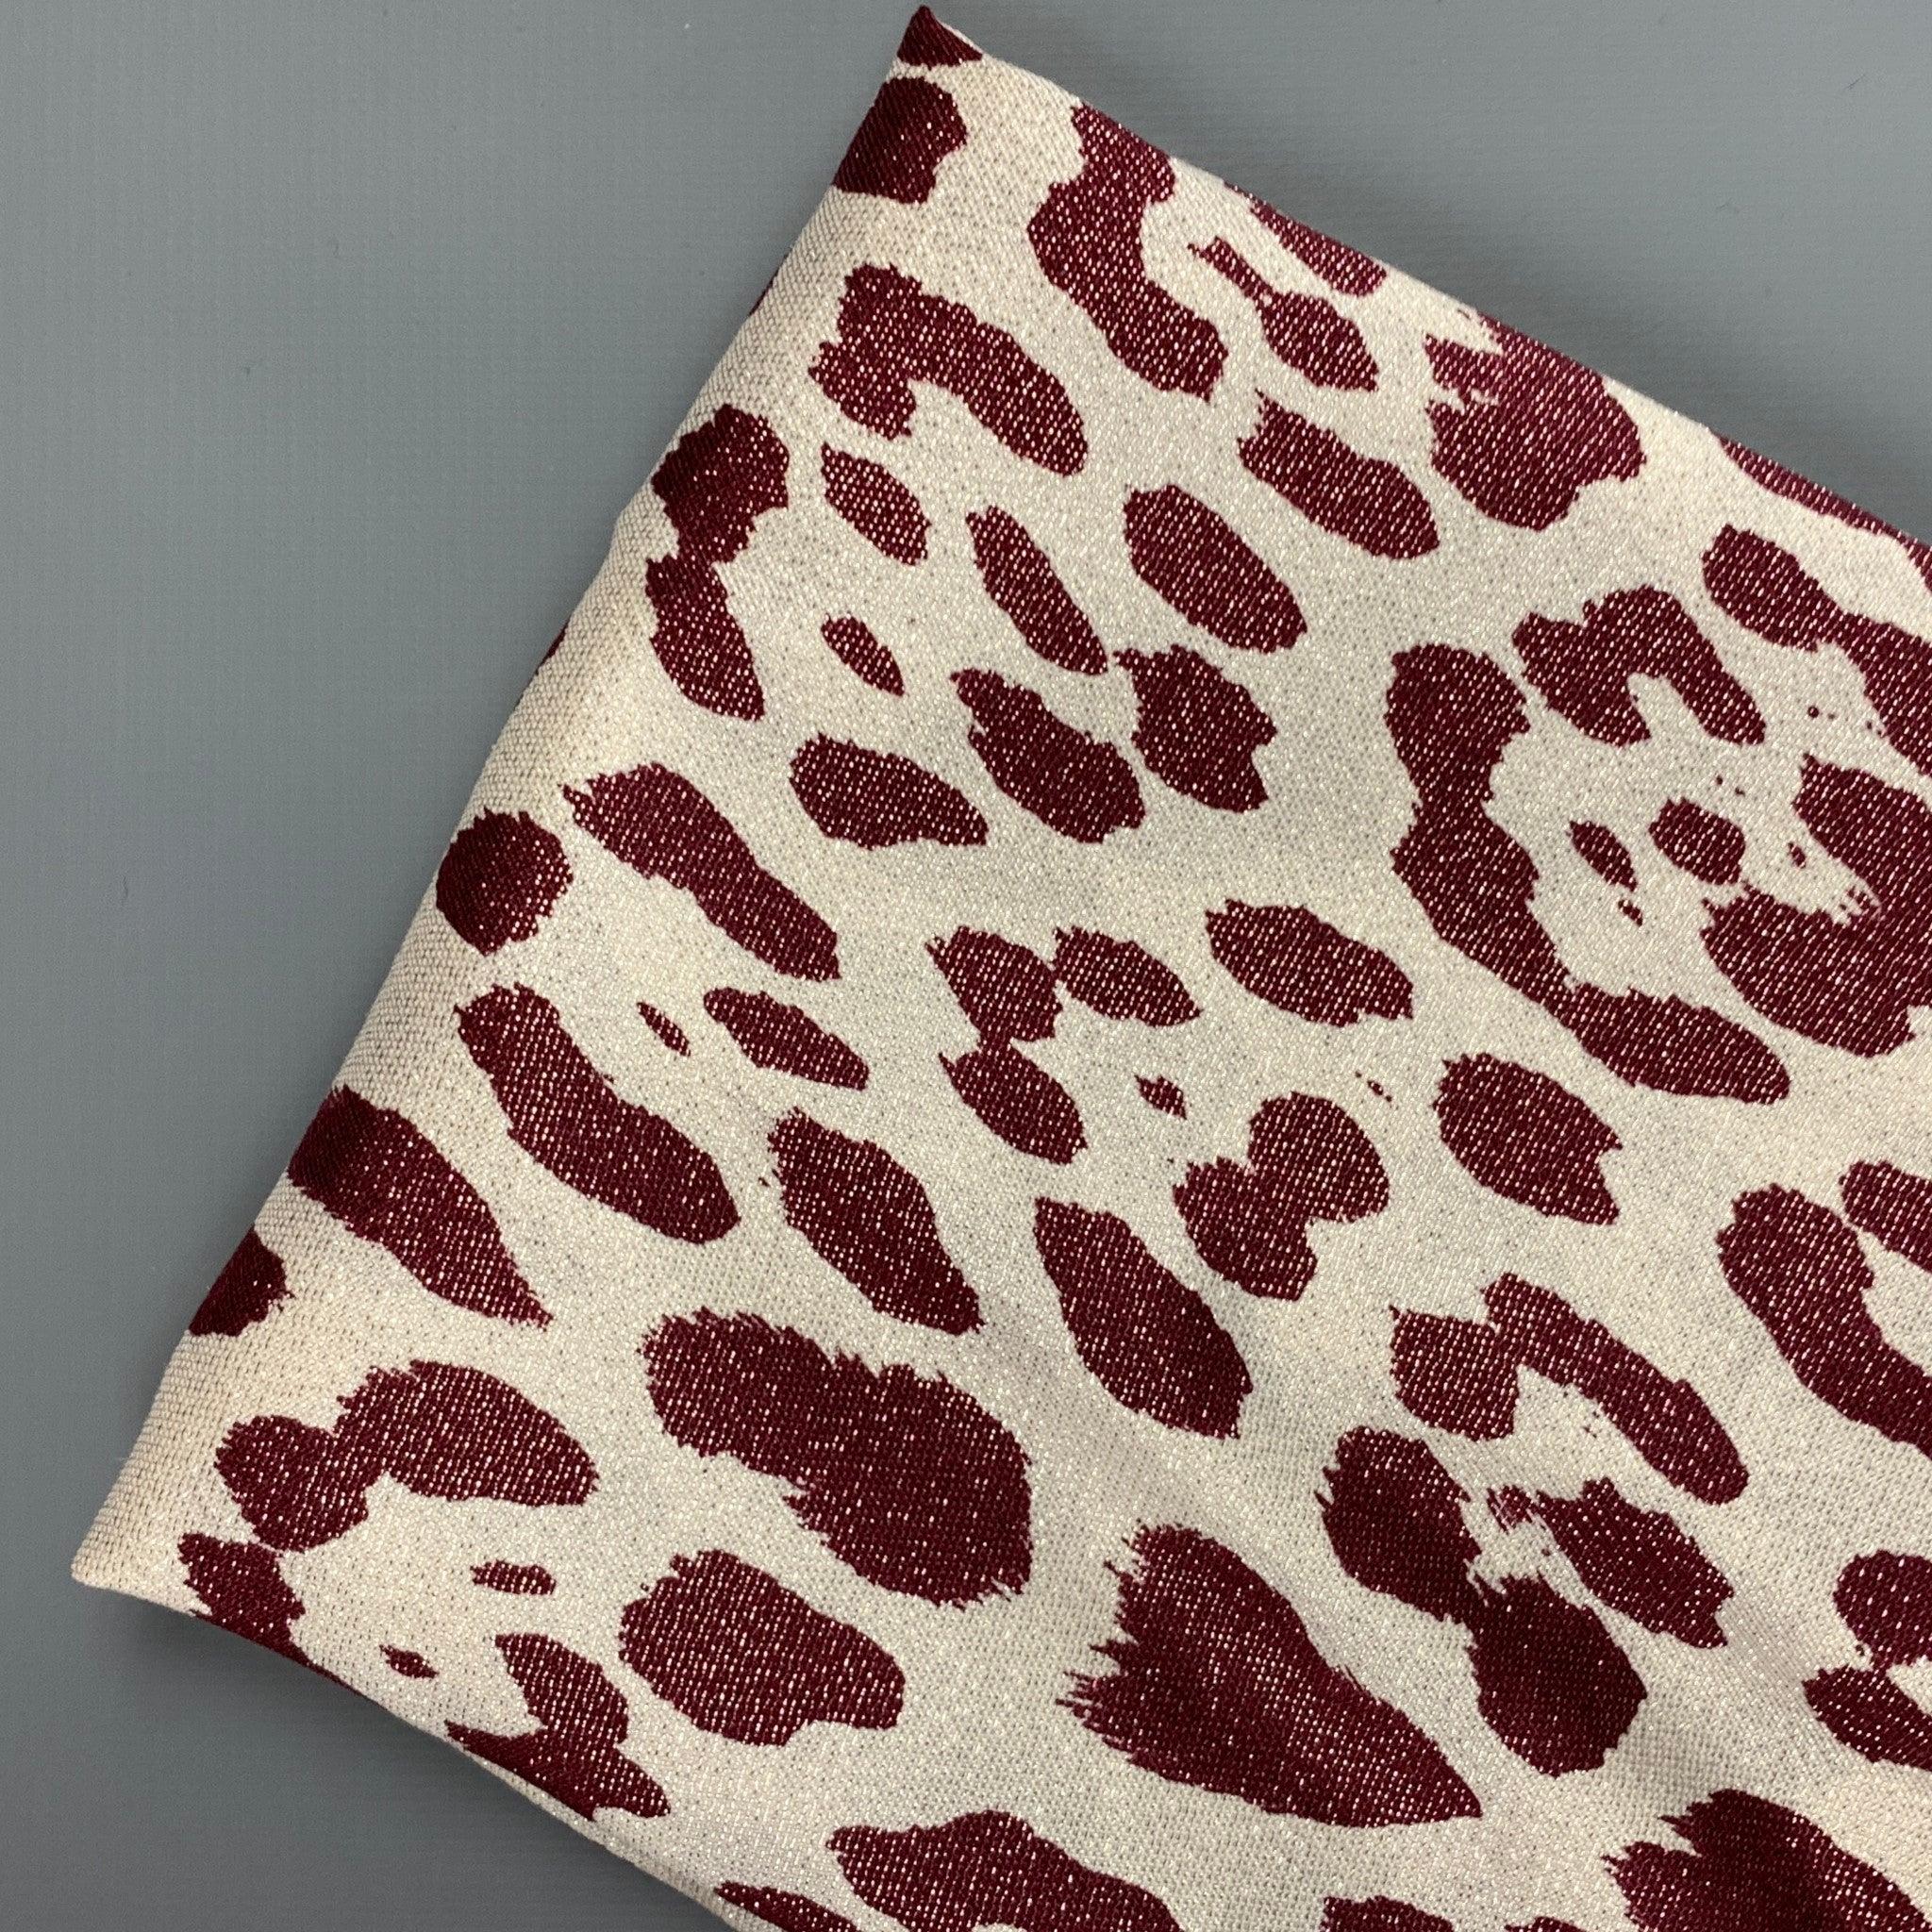 HAIDER ACKERMANN scarf comes in a beige & burgundy metallic animal print material. Made in Italy.
Very Good Pre-Owned Condition. Fabric tag removed.  

Measurements: 
  
58 inches  x 58 inches 
  
  
 
Reference: 119788
Category: Scarves
More